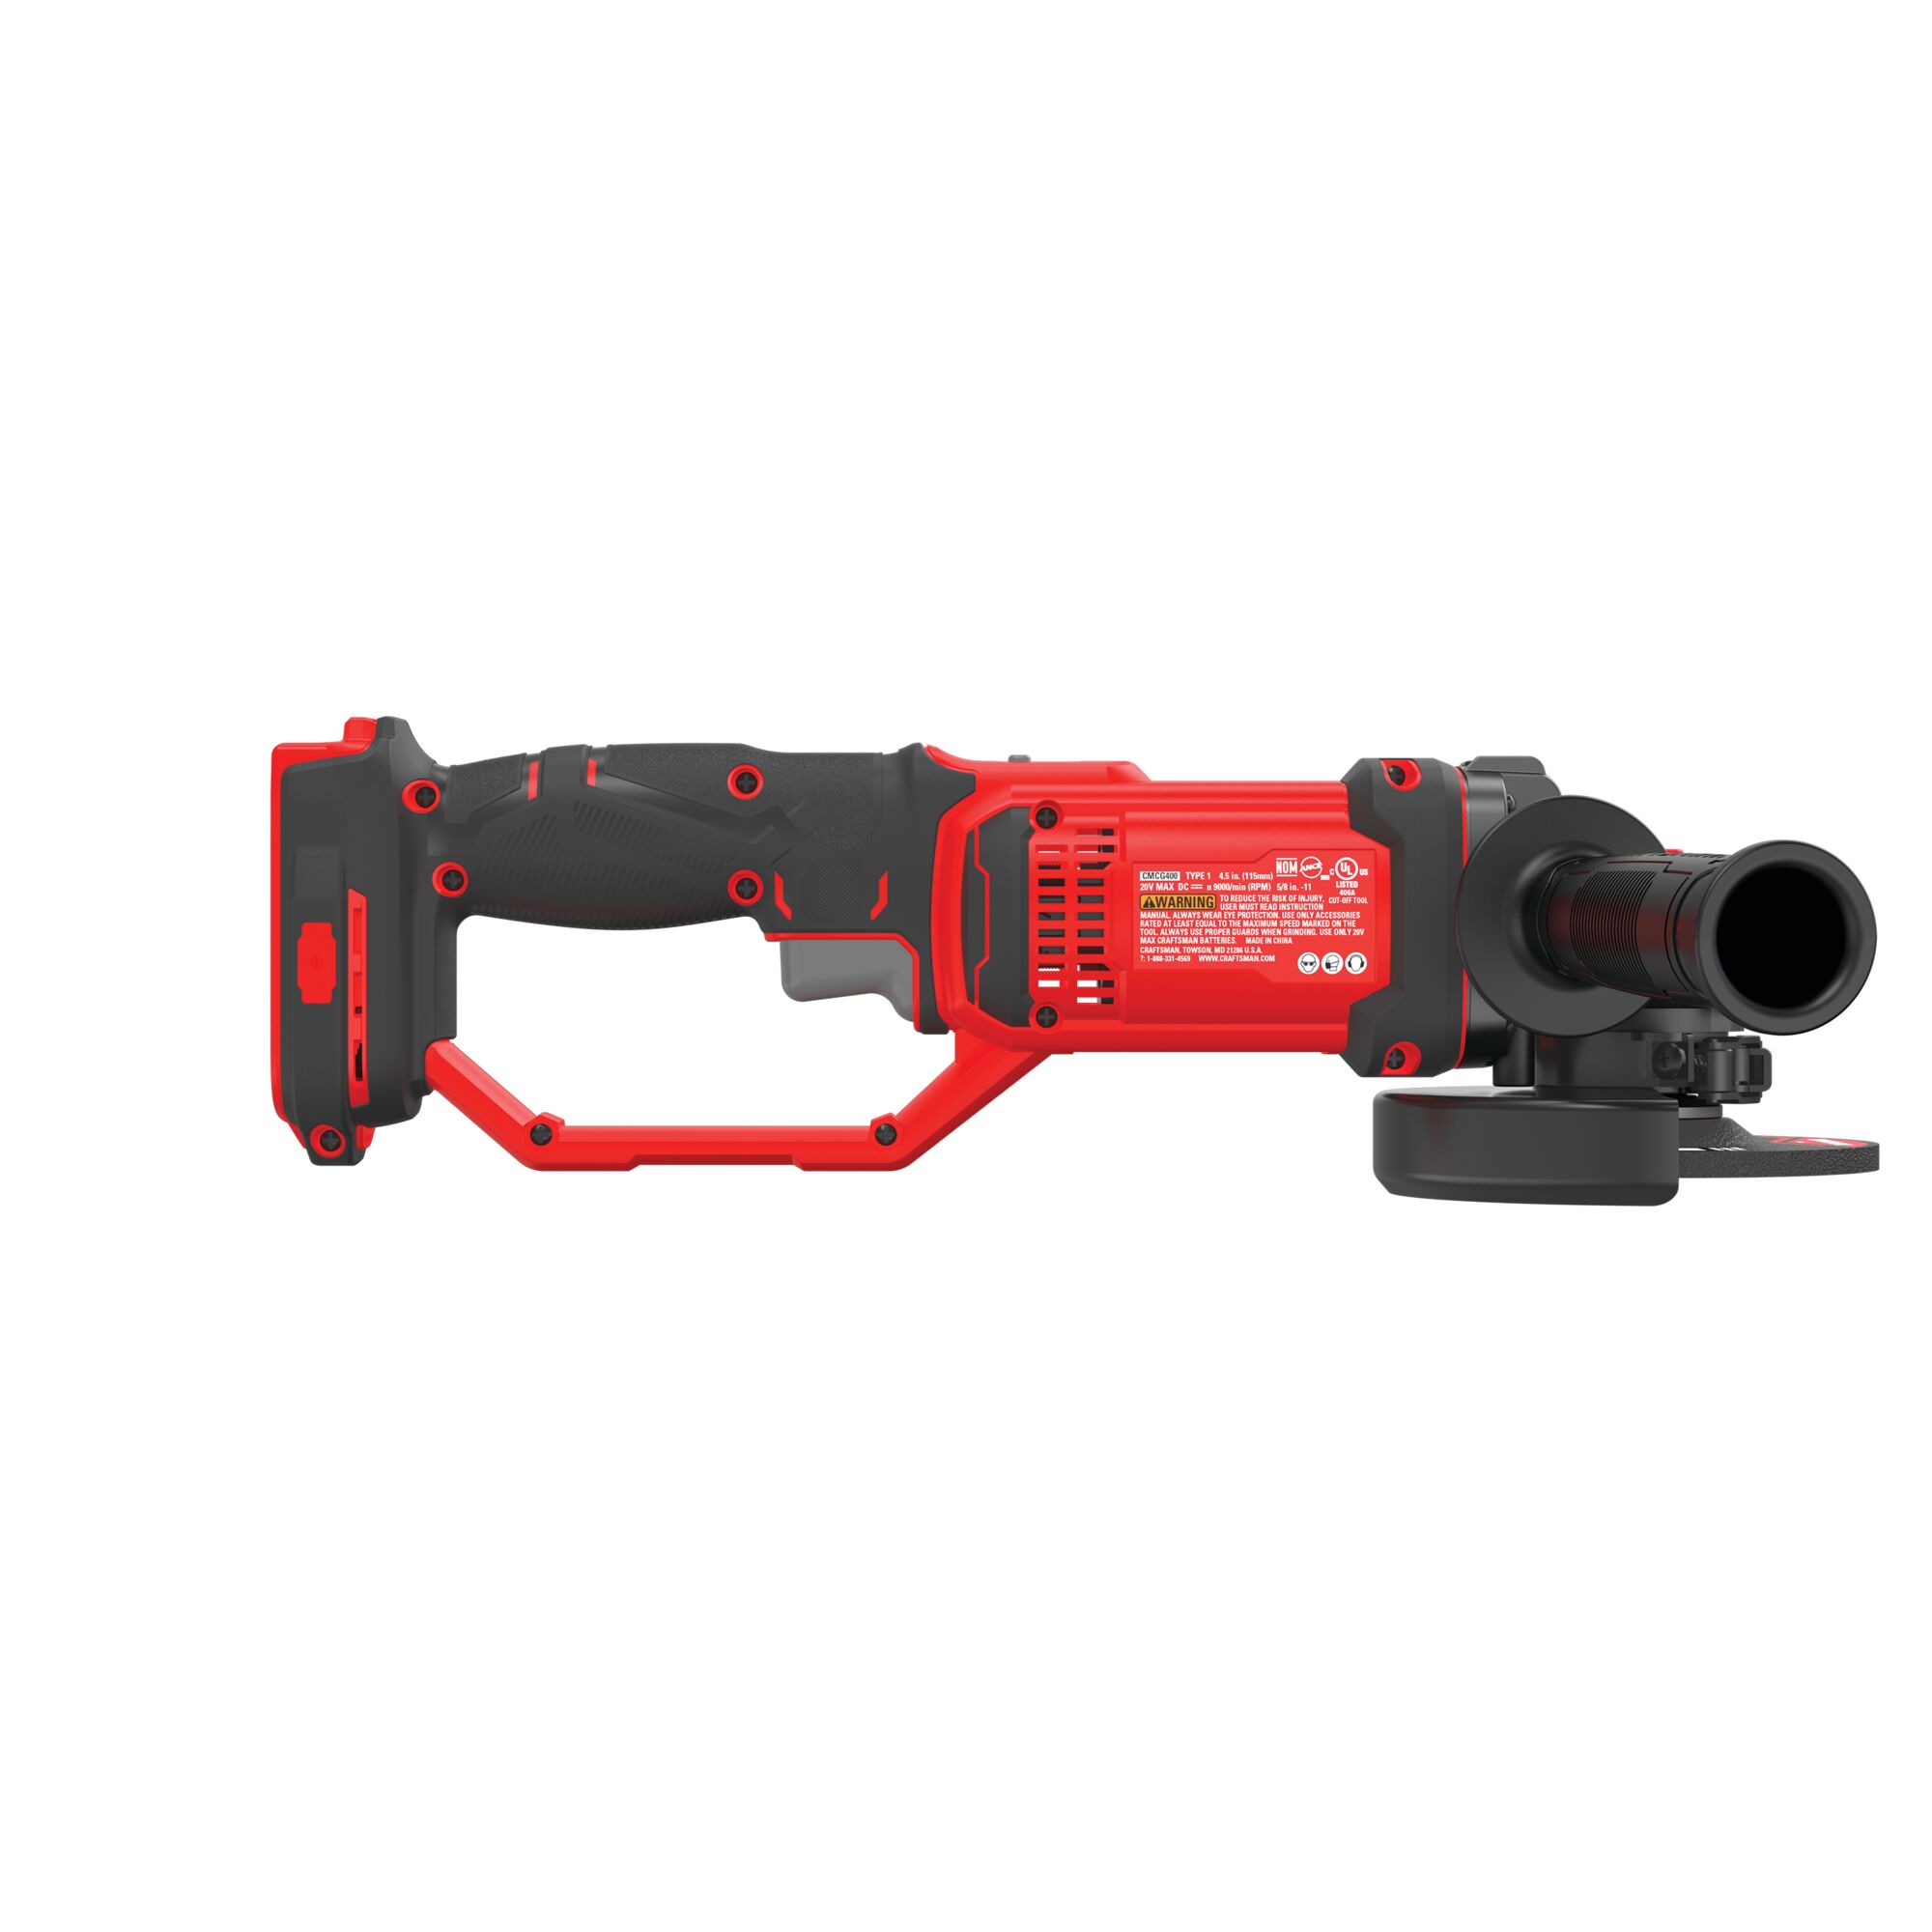 Right profile  view of cordless 4 and half inch small angle grinder tool.